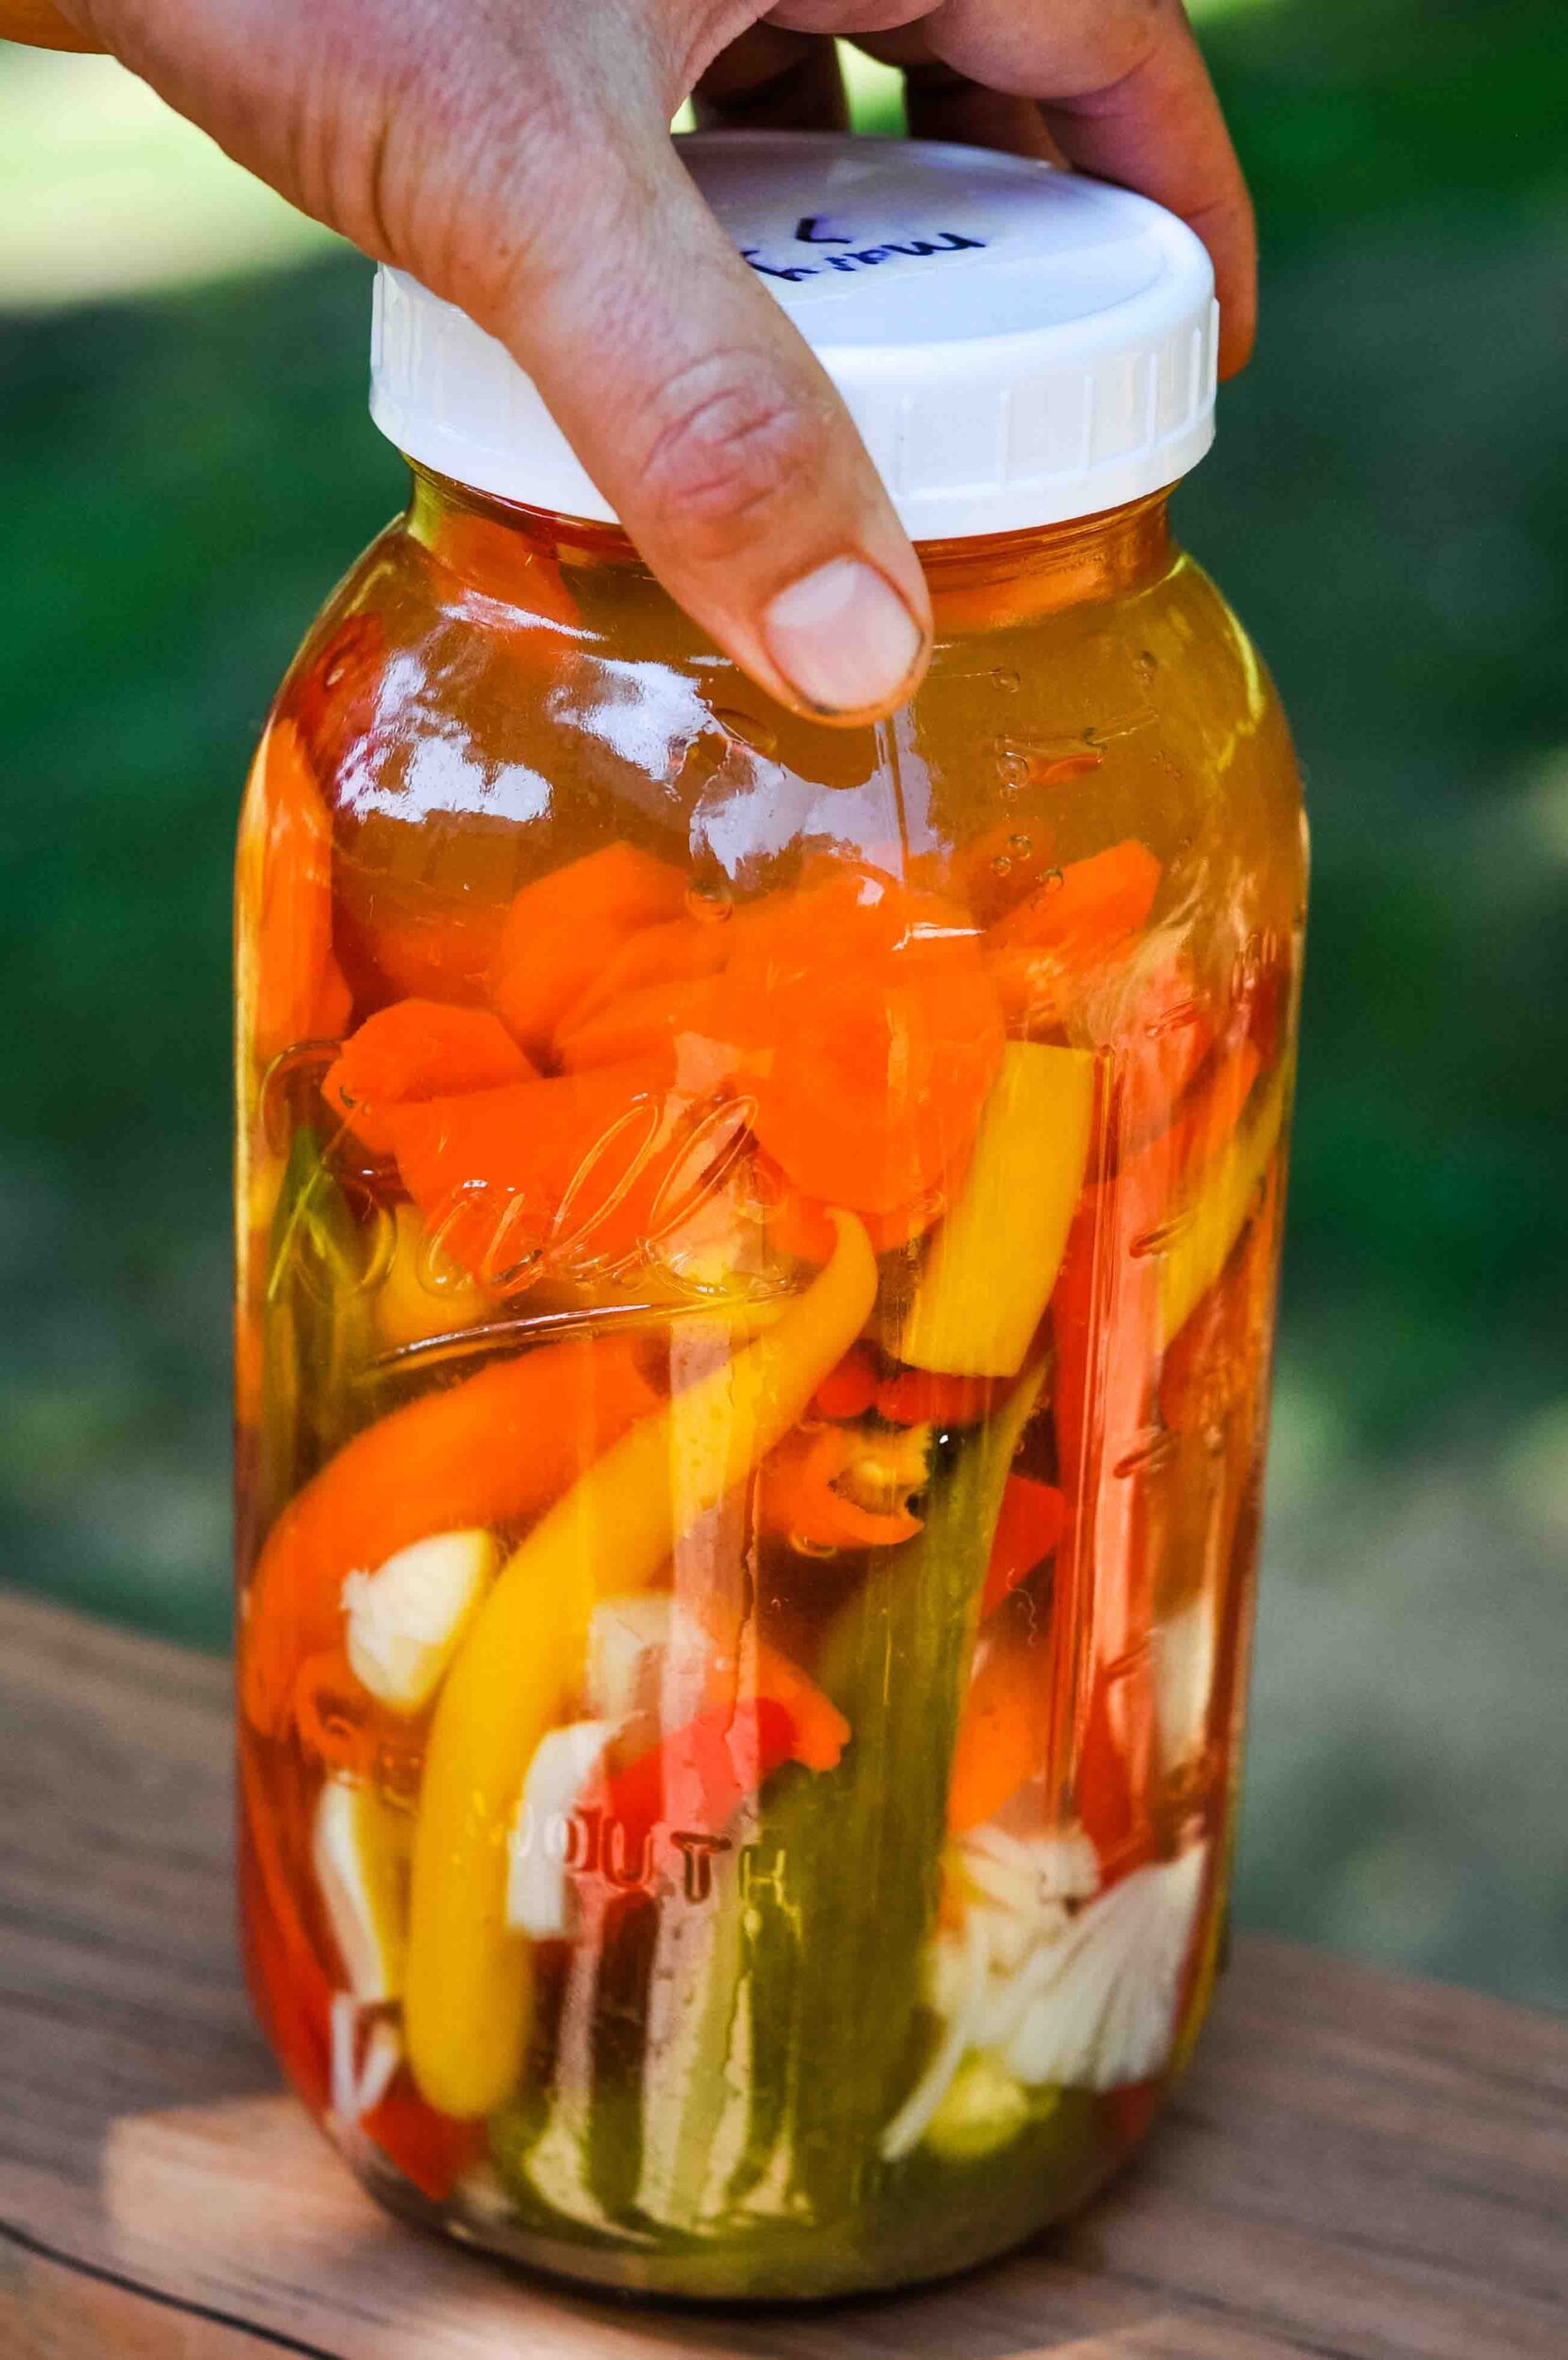 Hand holding a large jar of fermented peppers.